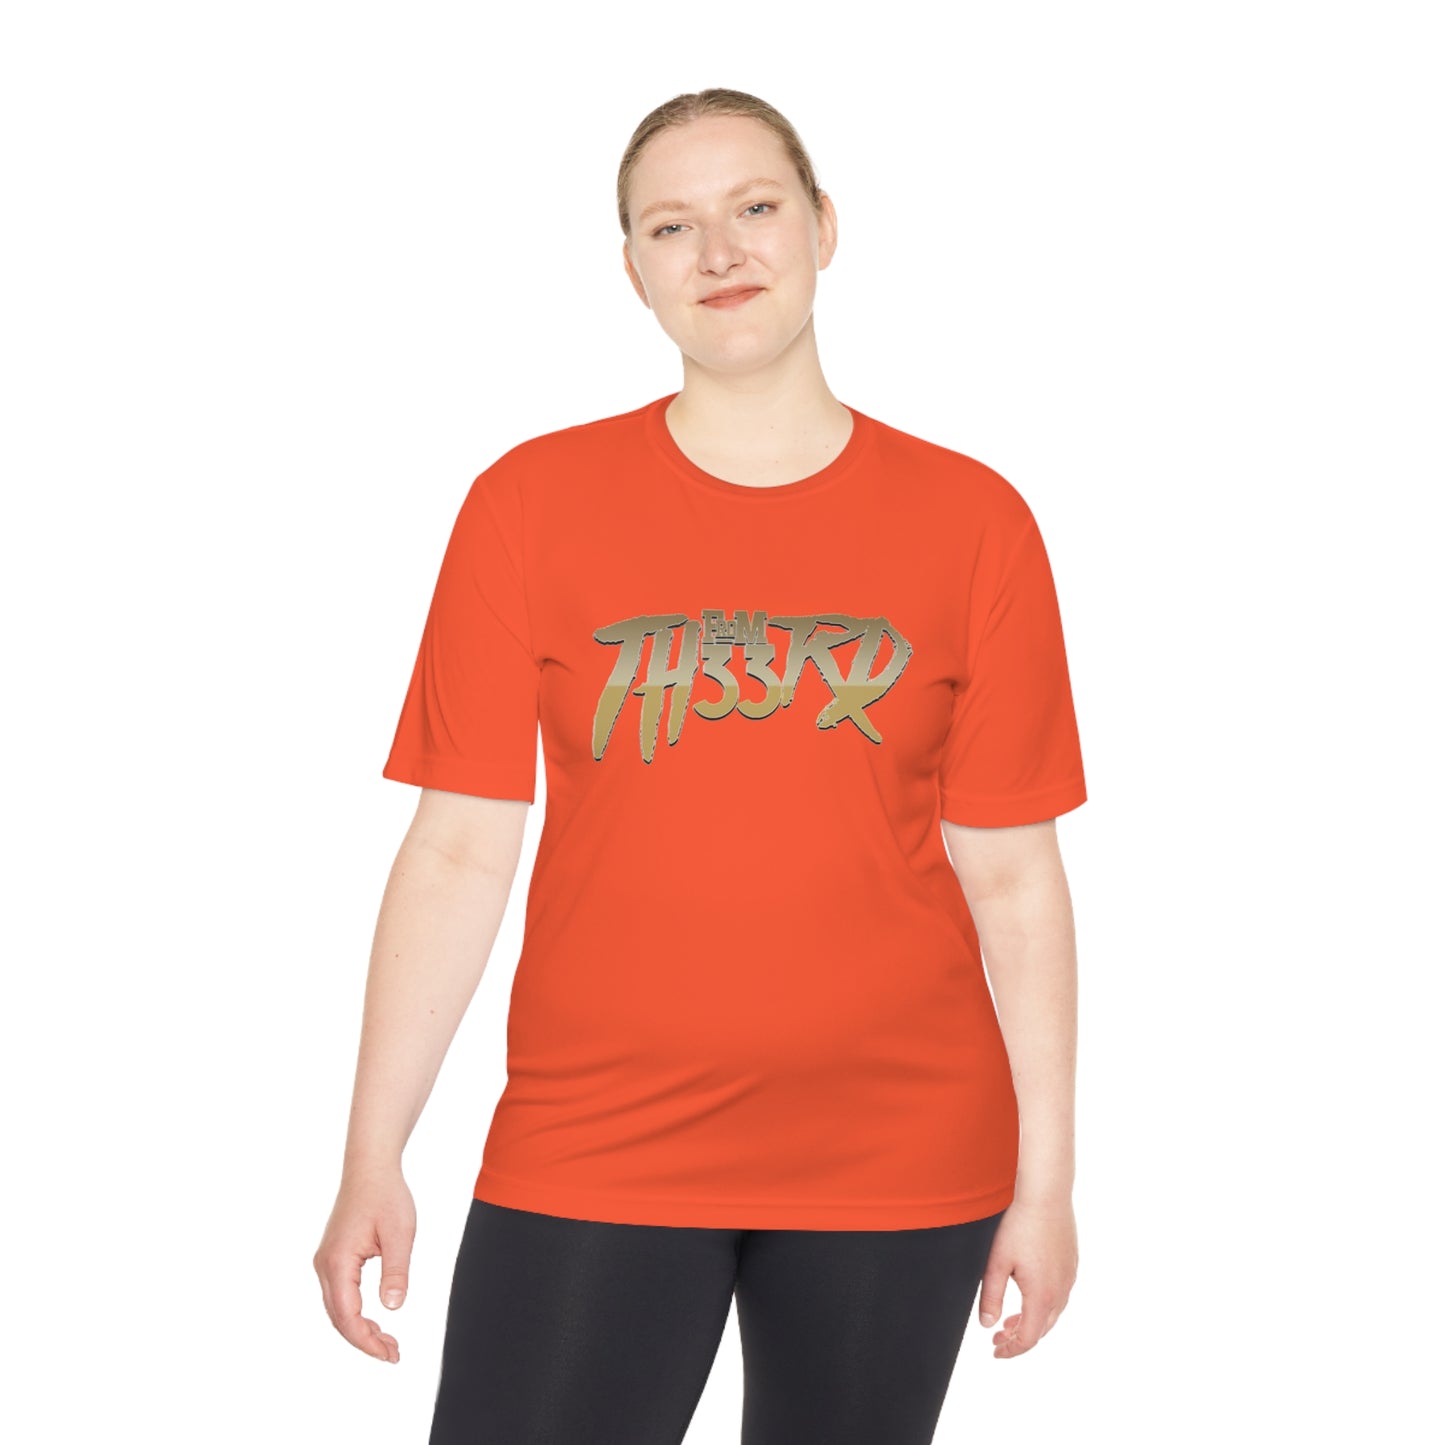 Fromth33rd Moisture Wicking Tee